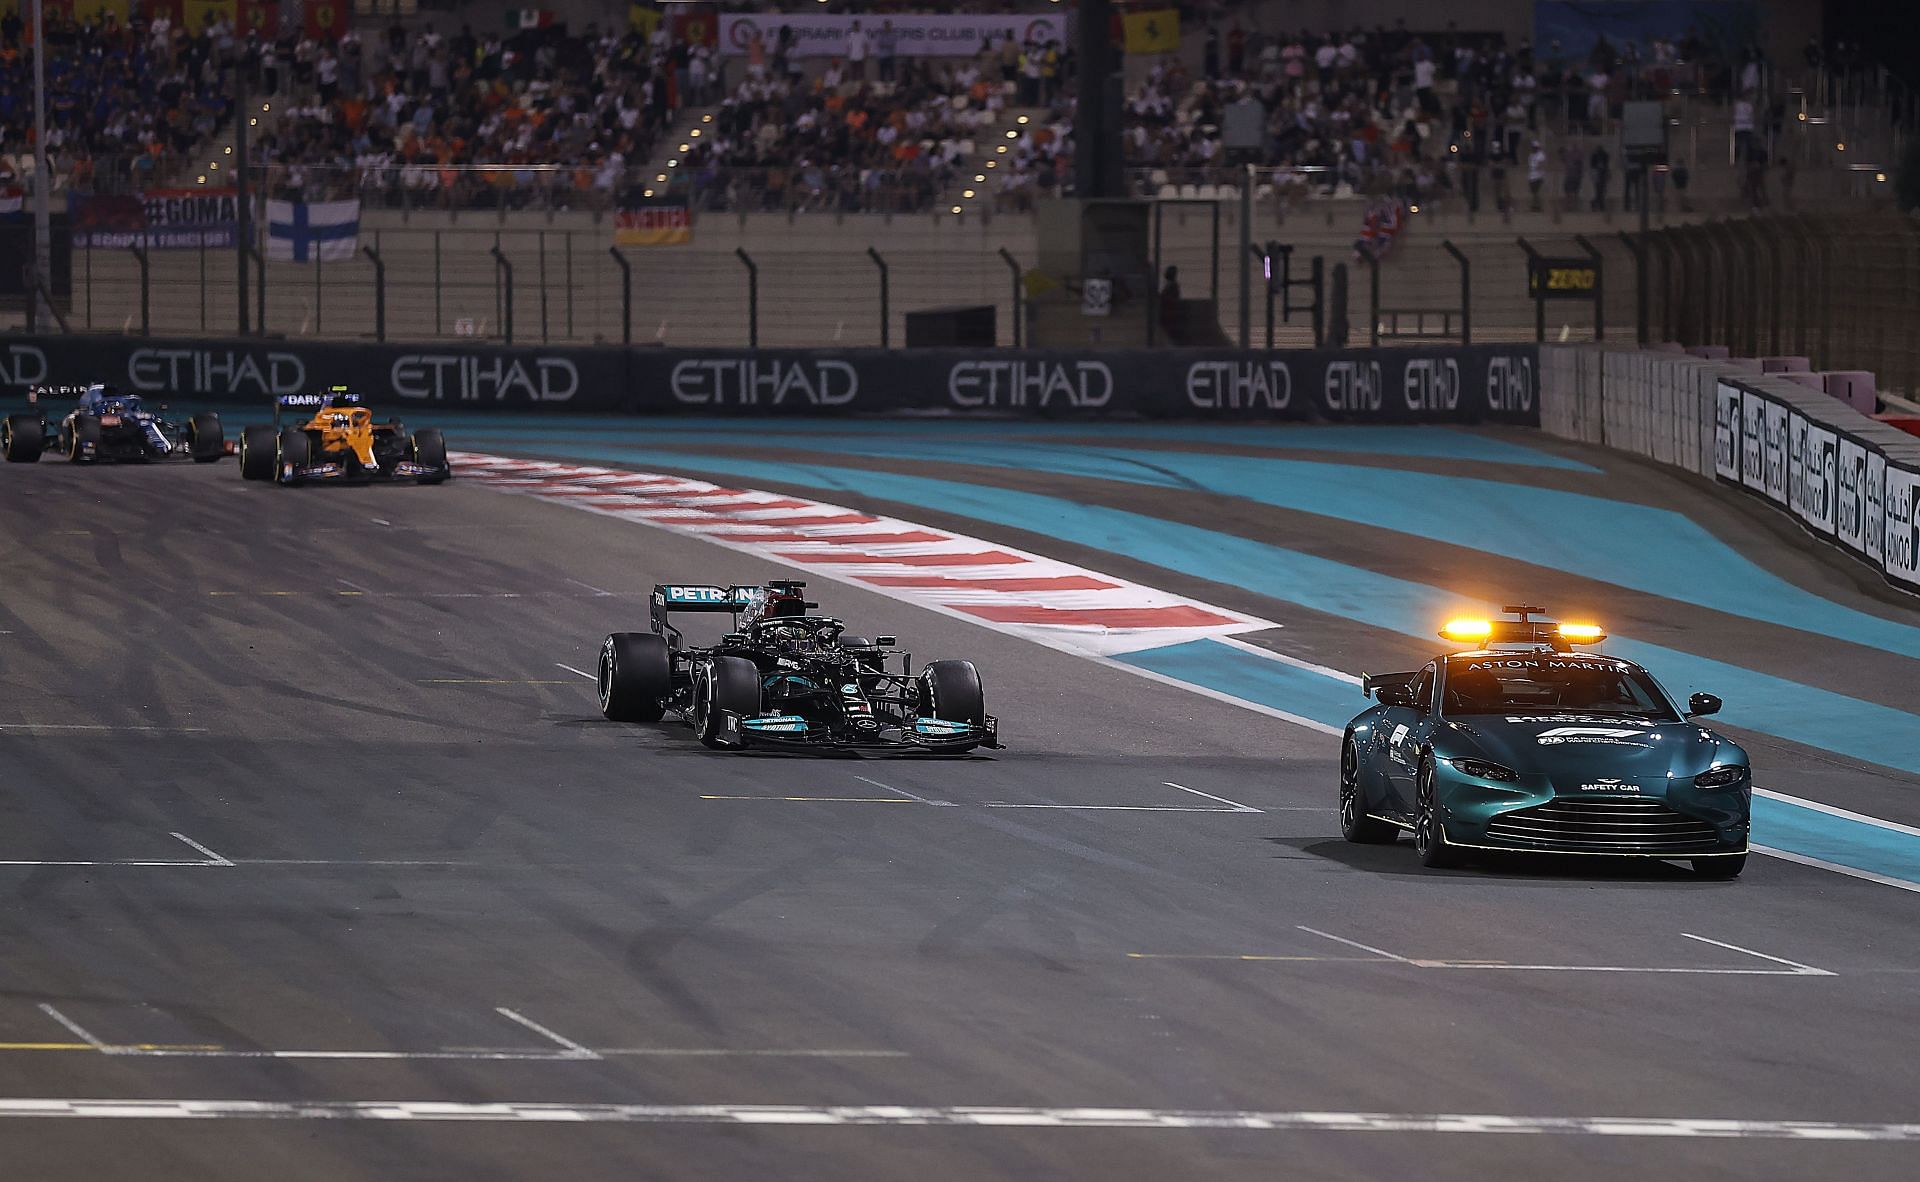 FIA Safety car (right) leads Lewis Hamilton&#039;s Mercedes (centre), with the rest of grid in the background, on lap 55 of the Abu Dhabi Grand Prix